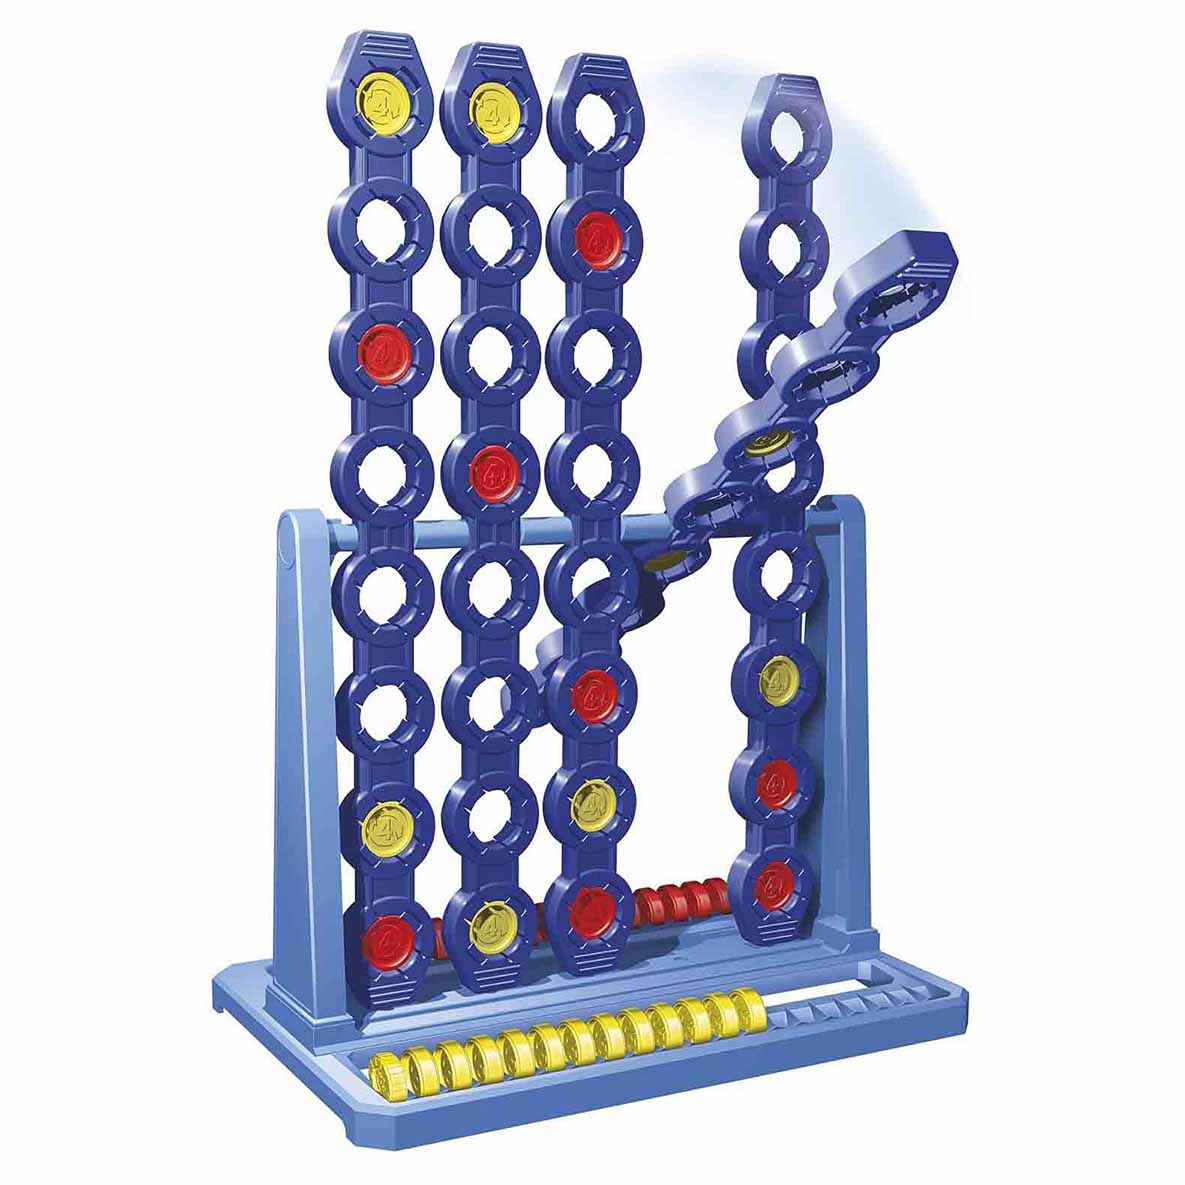 Connect 4 game in action